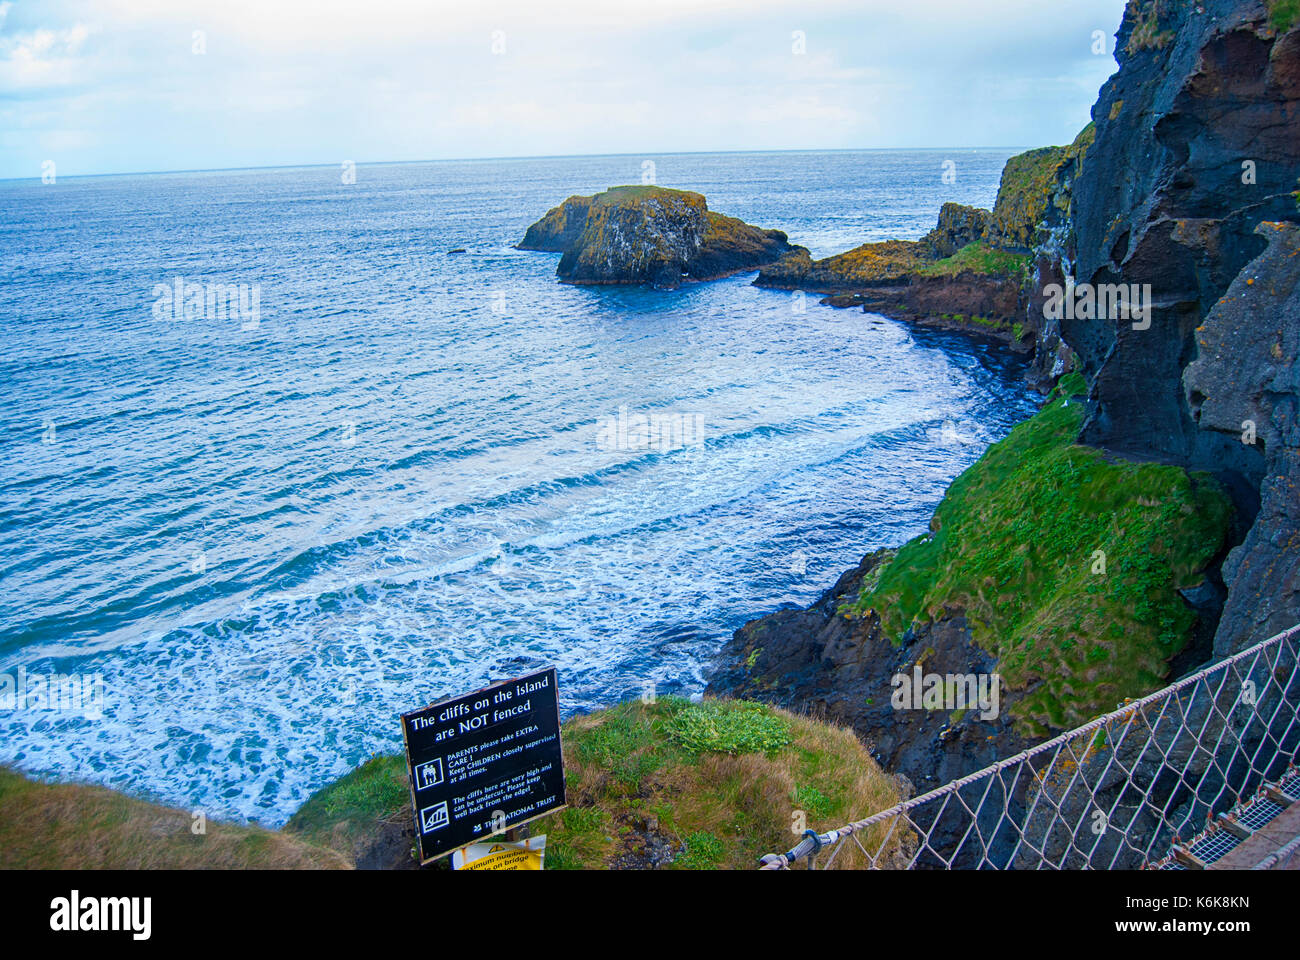 Ballintoy, United Kingdom - May 2, 2016: Carrick-a-Rede Rope Bridge, a popular tourist destination in Northern Ireland. Tourists passing the bridge. Stock Photo